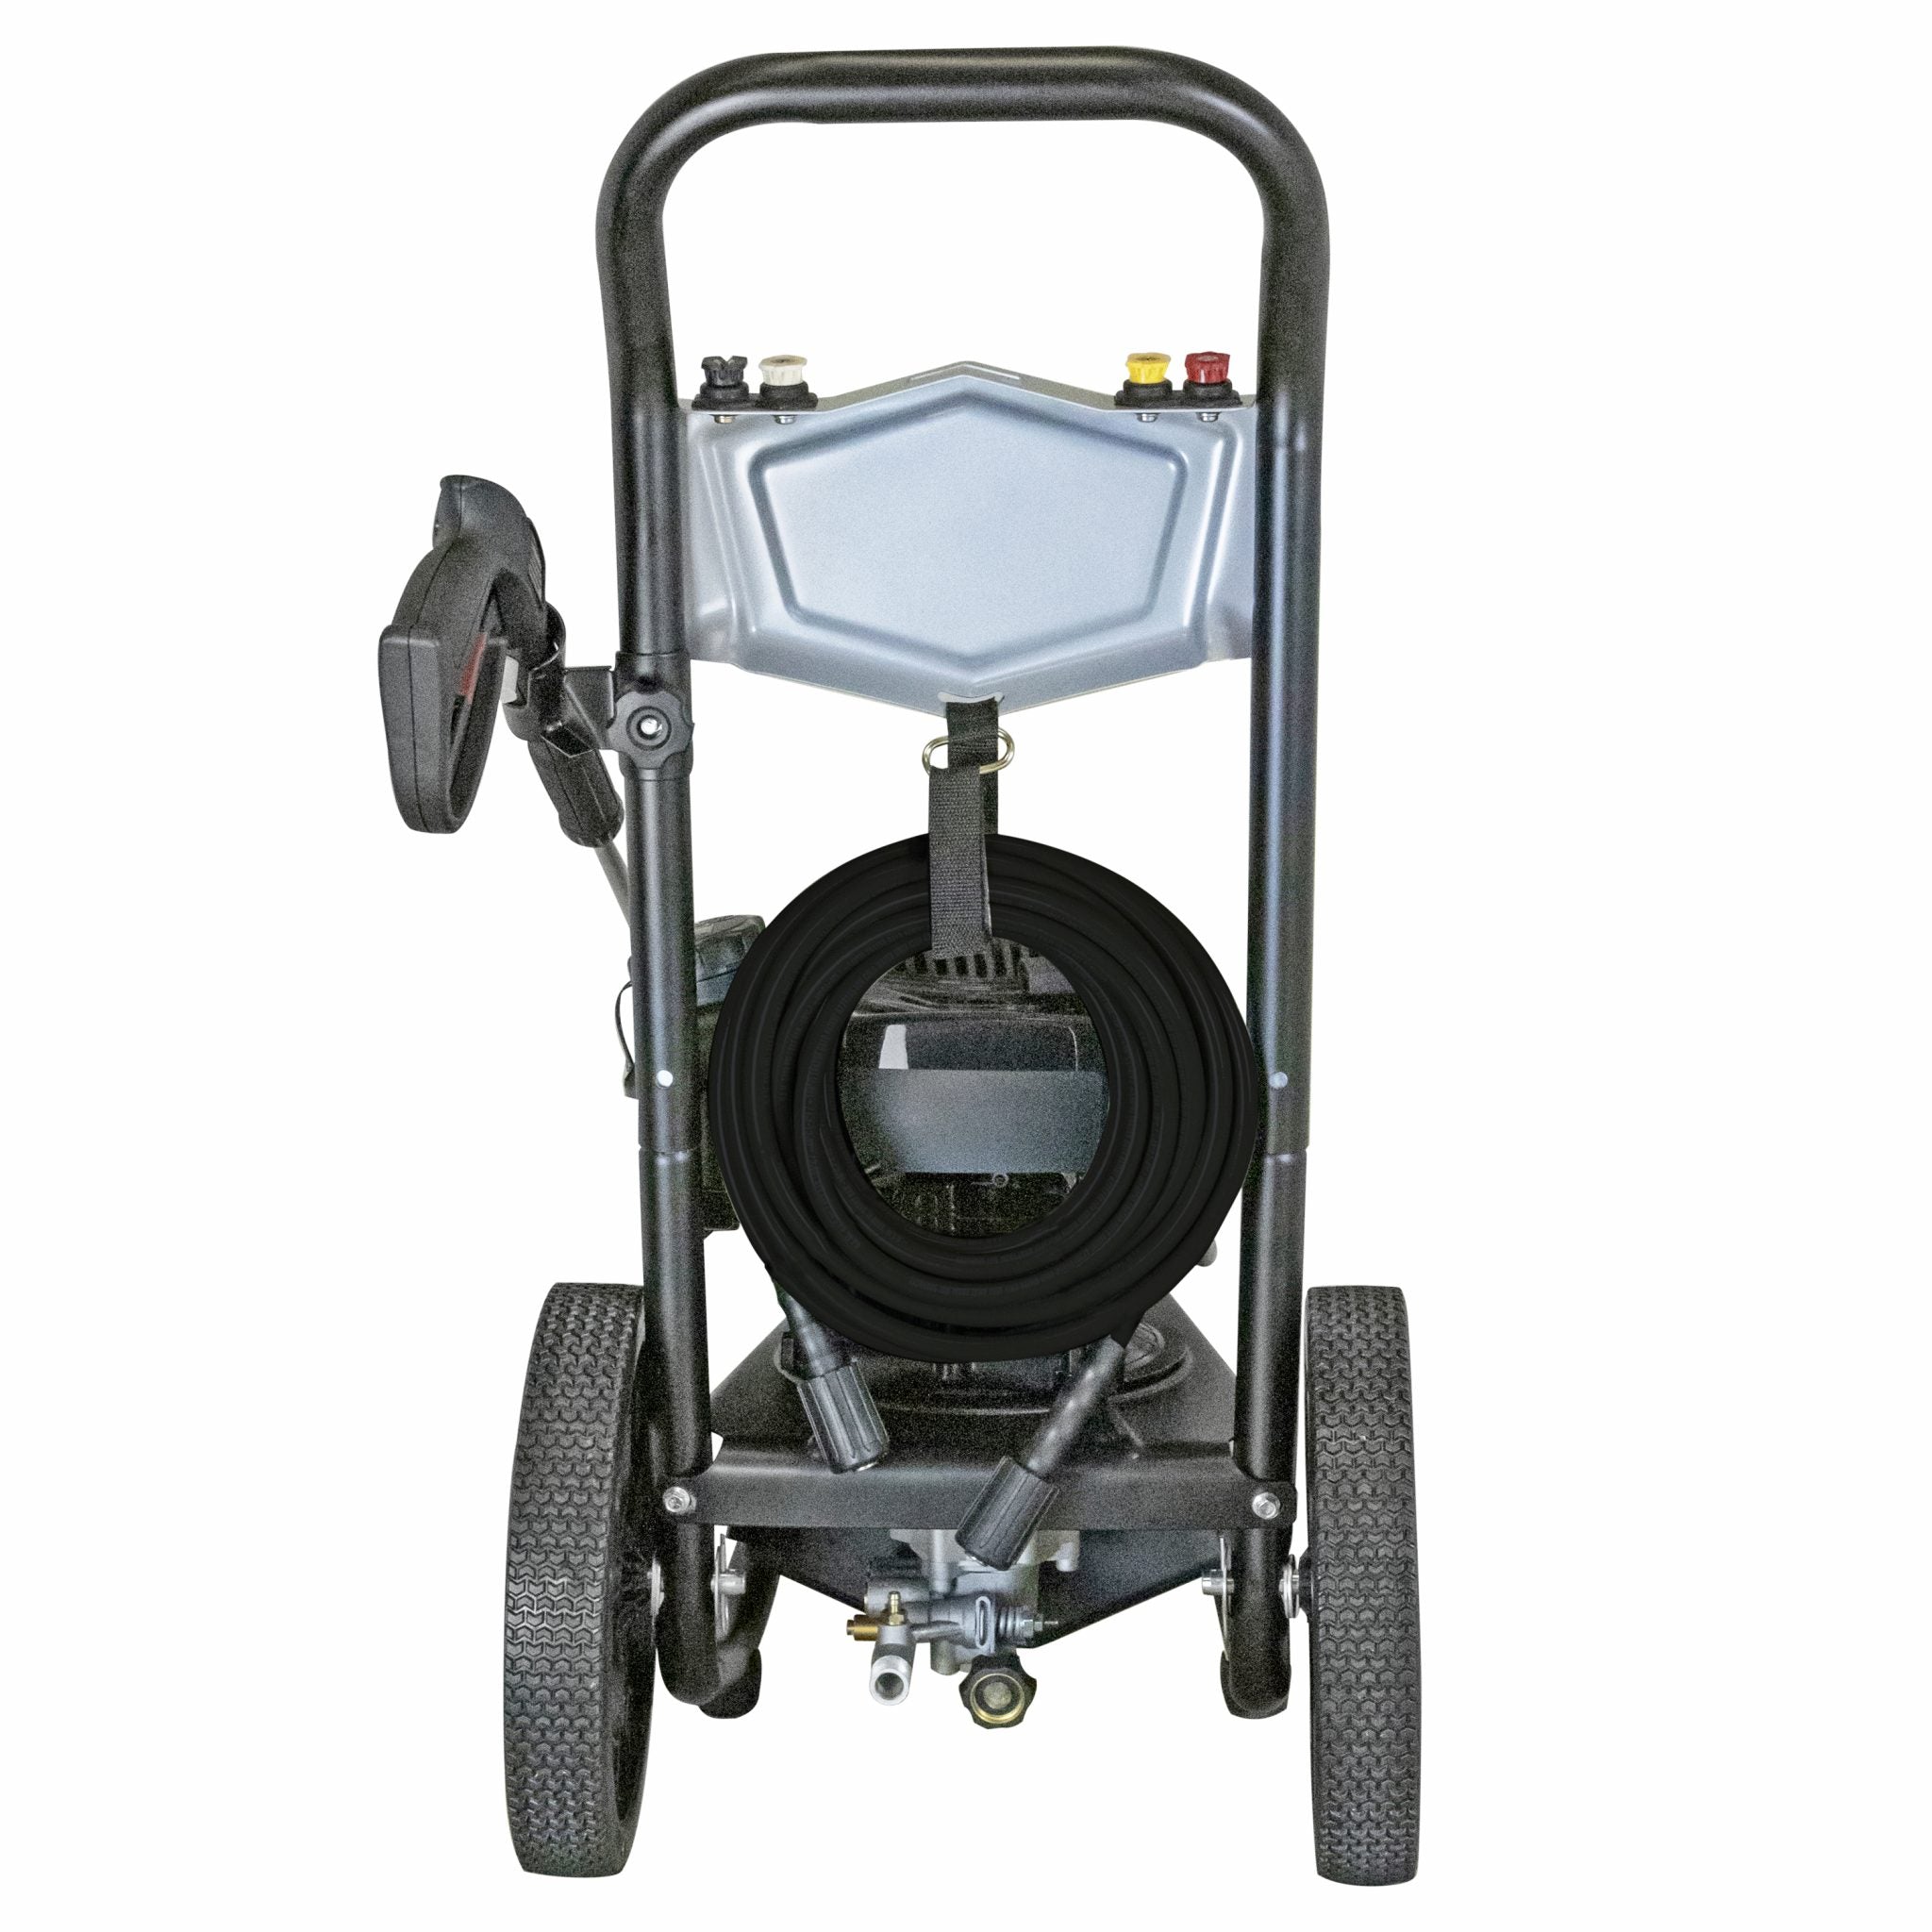 Simpson Megashot MS61048 2800-PSI Gas Pressure Washer with Briggs and Stratton OHV Engine